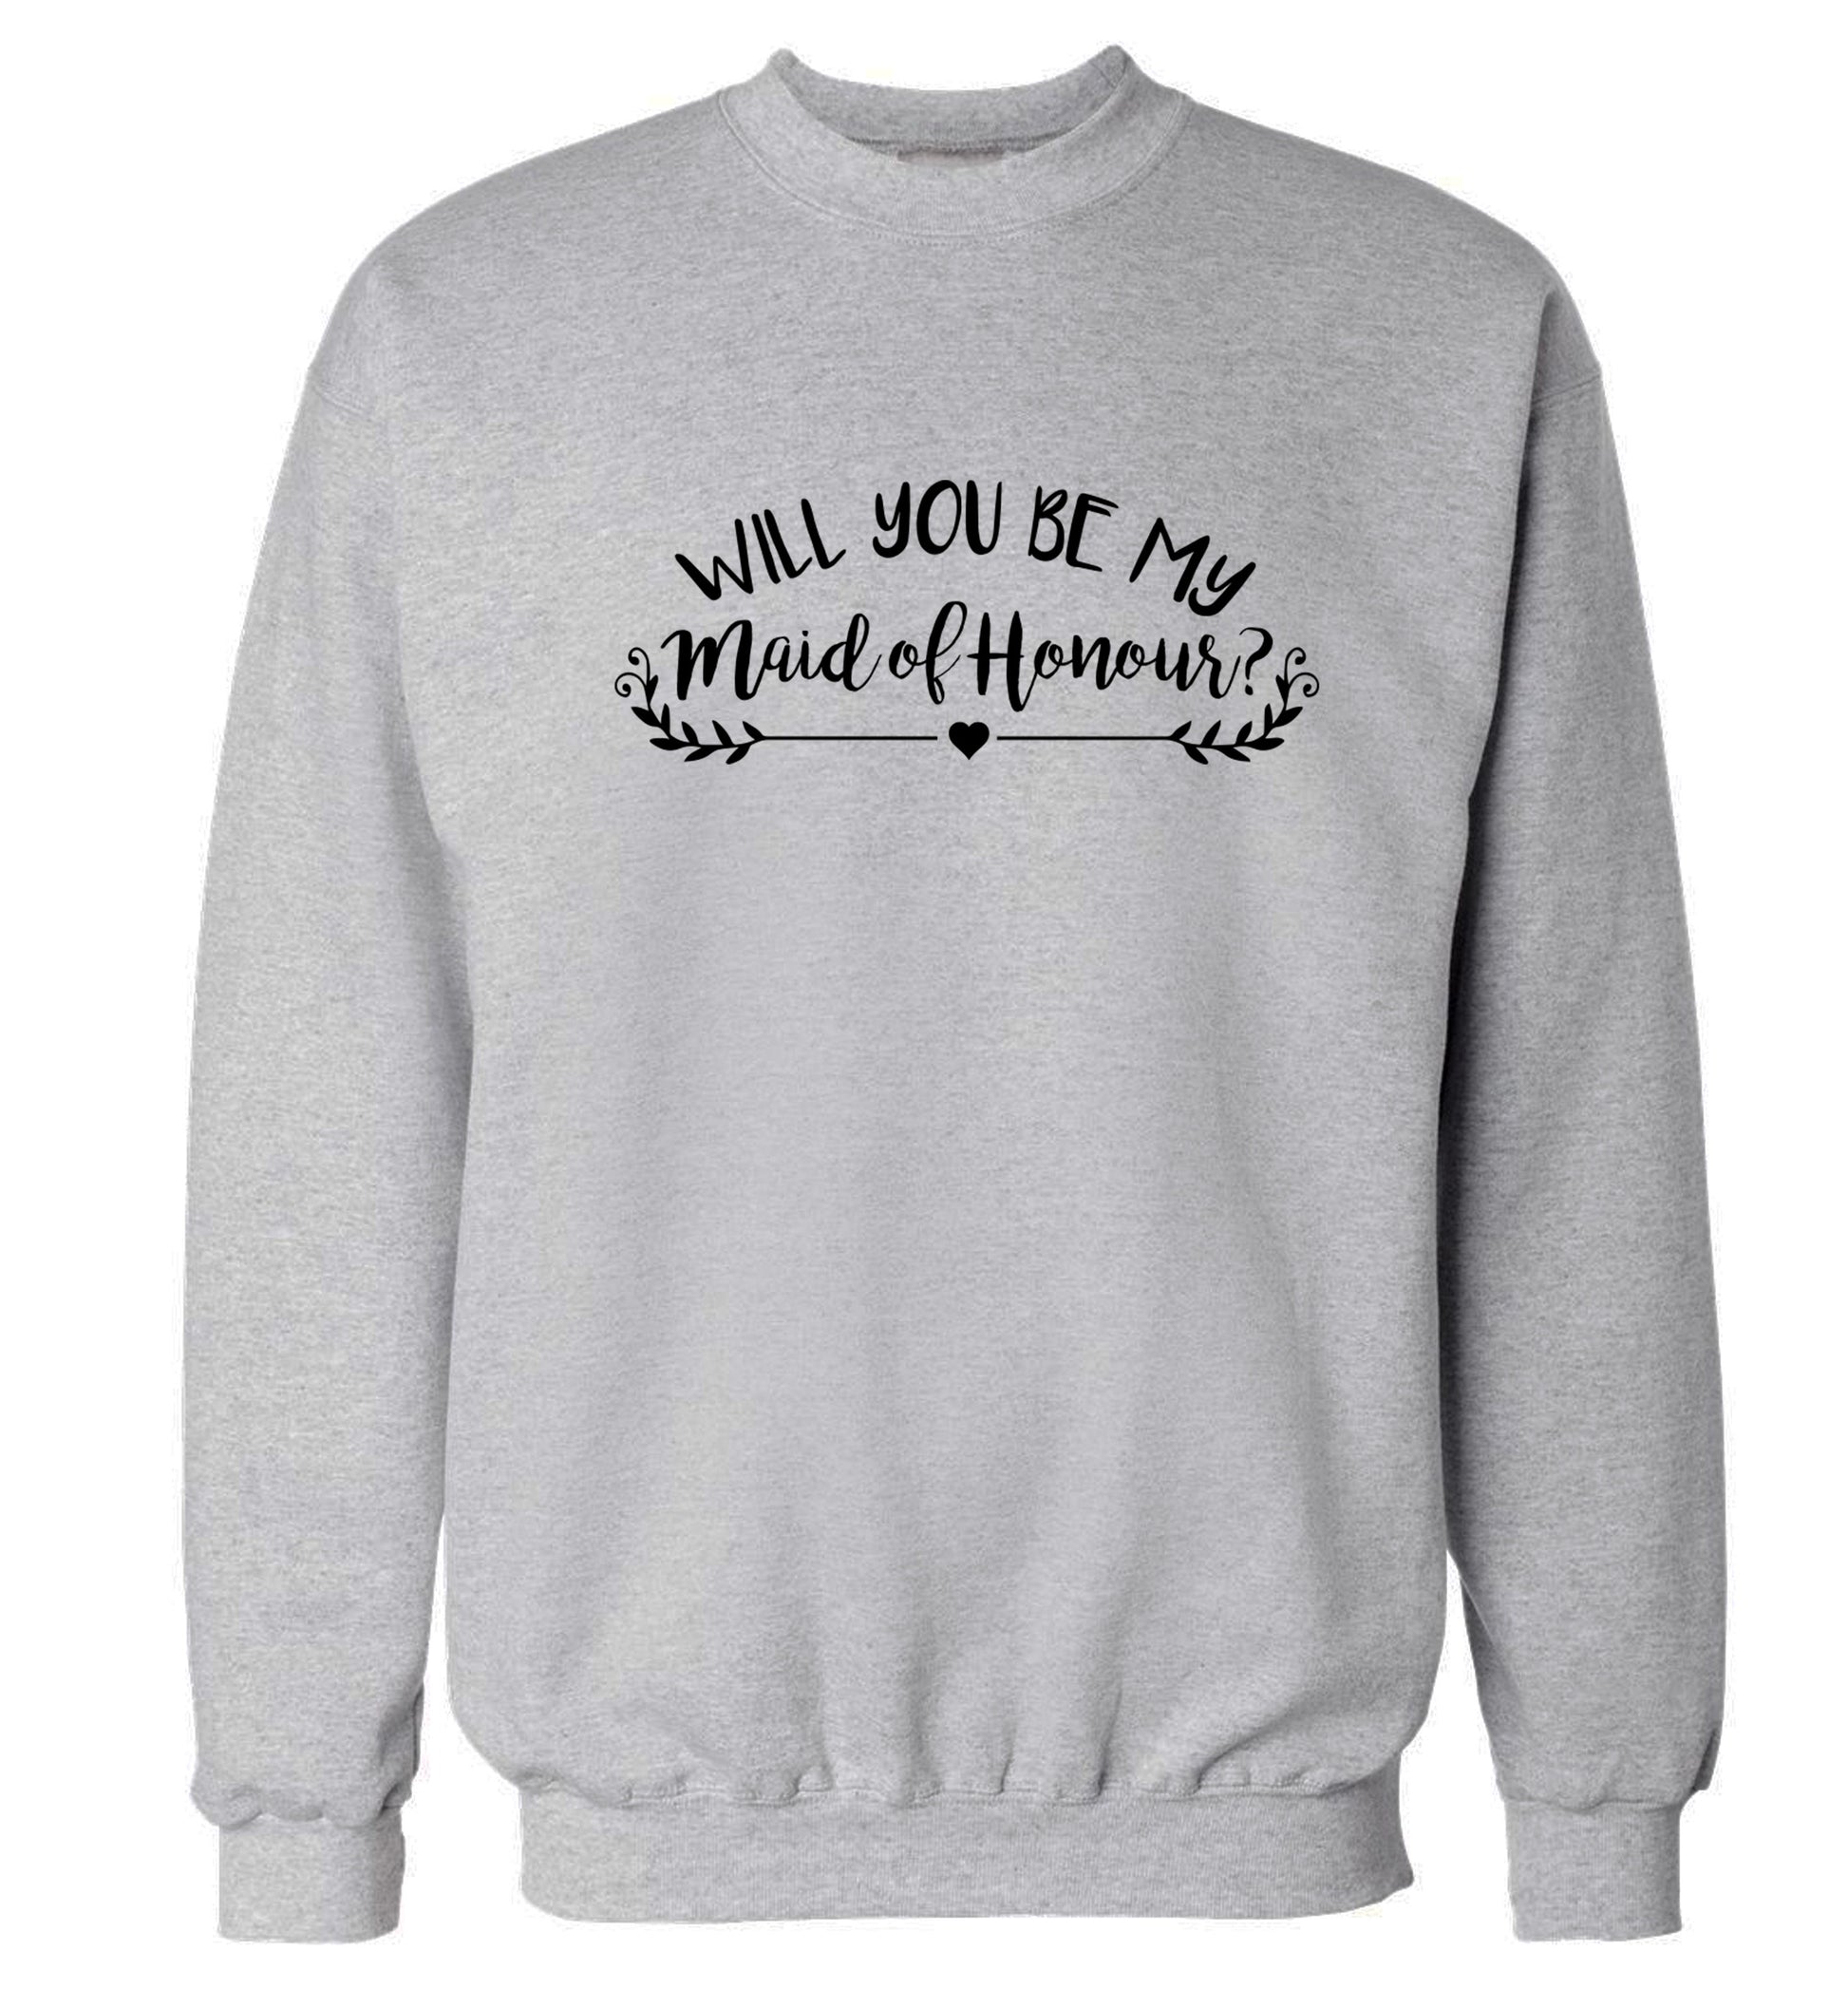 Will you be my maid of honour? Adult's unisex grey Sweater 2XL